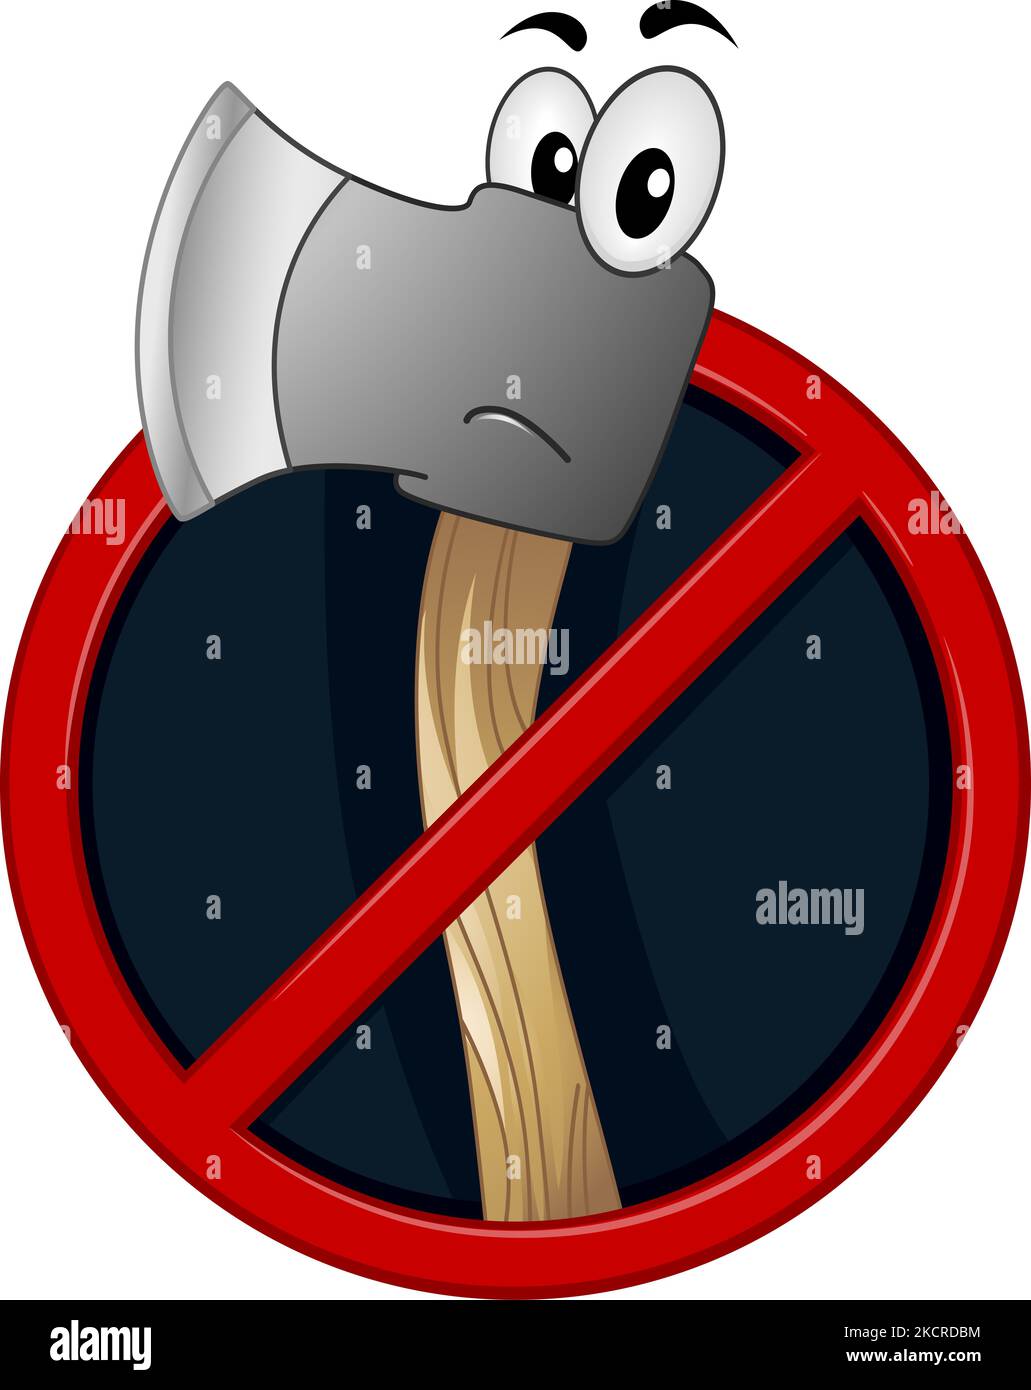 Illustration of Mascot Axe Inside a No Cutting or Chopping Wood Symbol Stock Photo